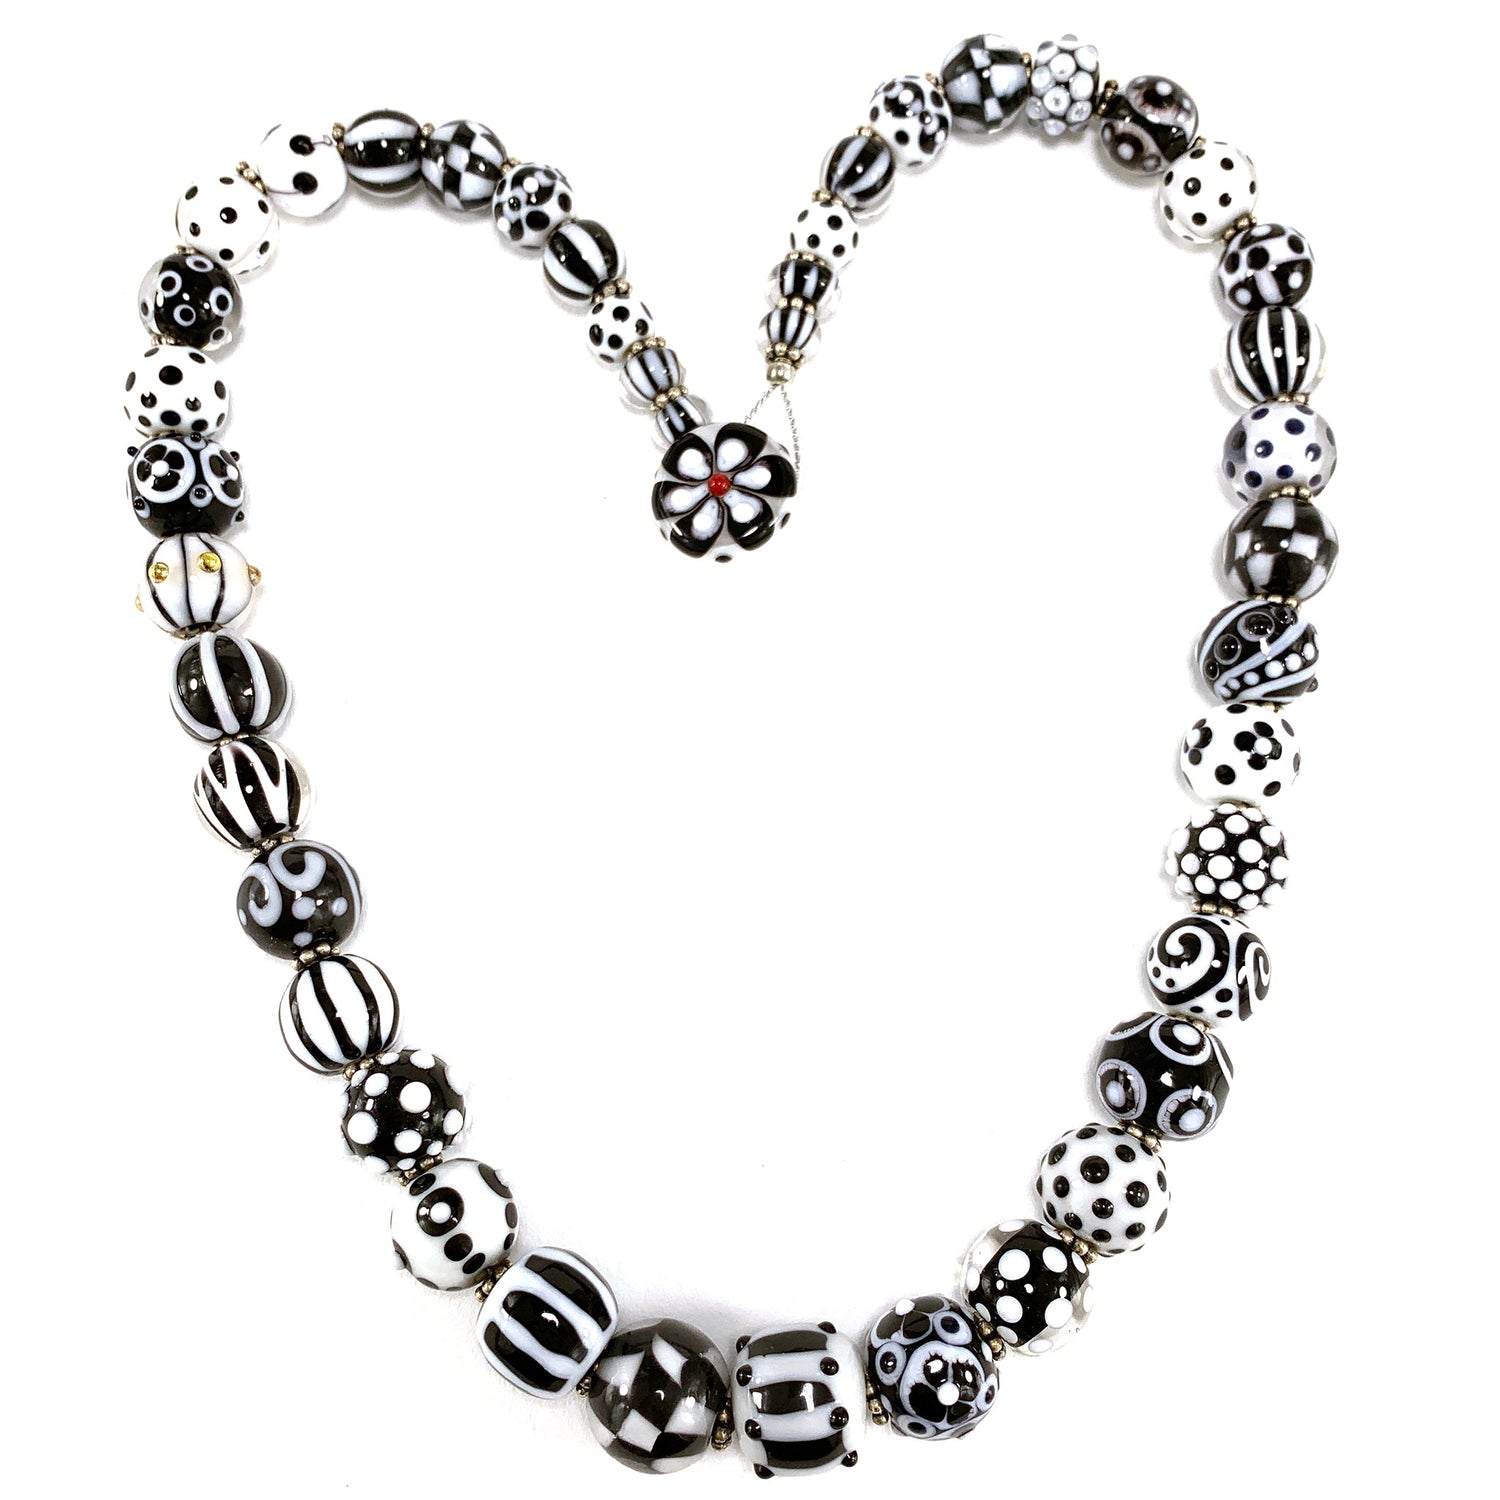 Black and White Boho Bead Collector's Necklace - The Glass Acorn